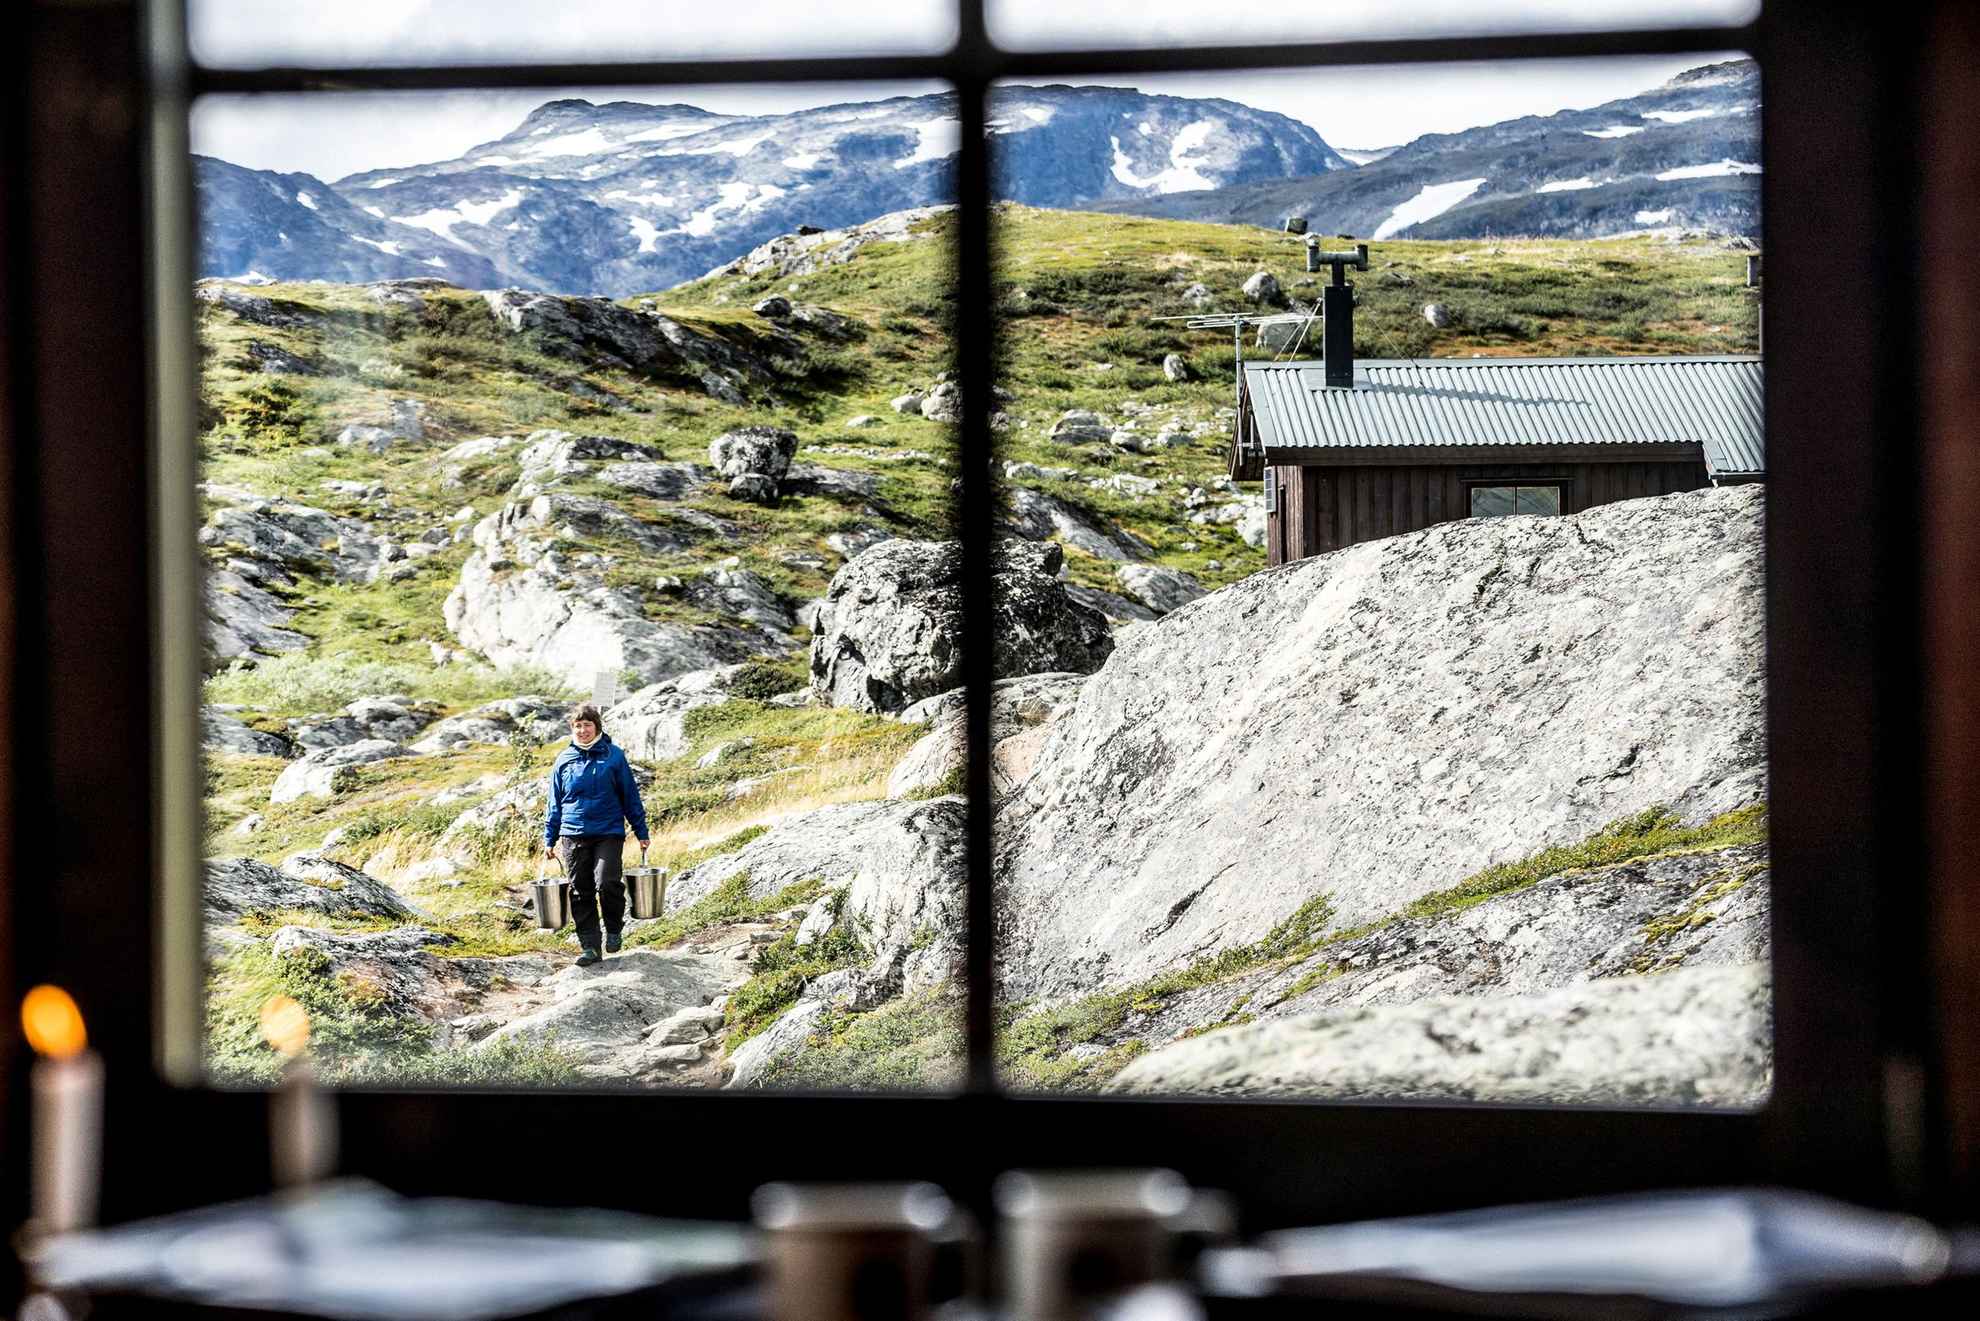 Mountain huts of the King's Trail, Swedish Lapland